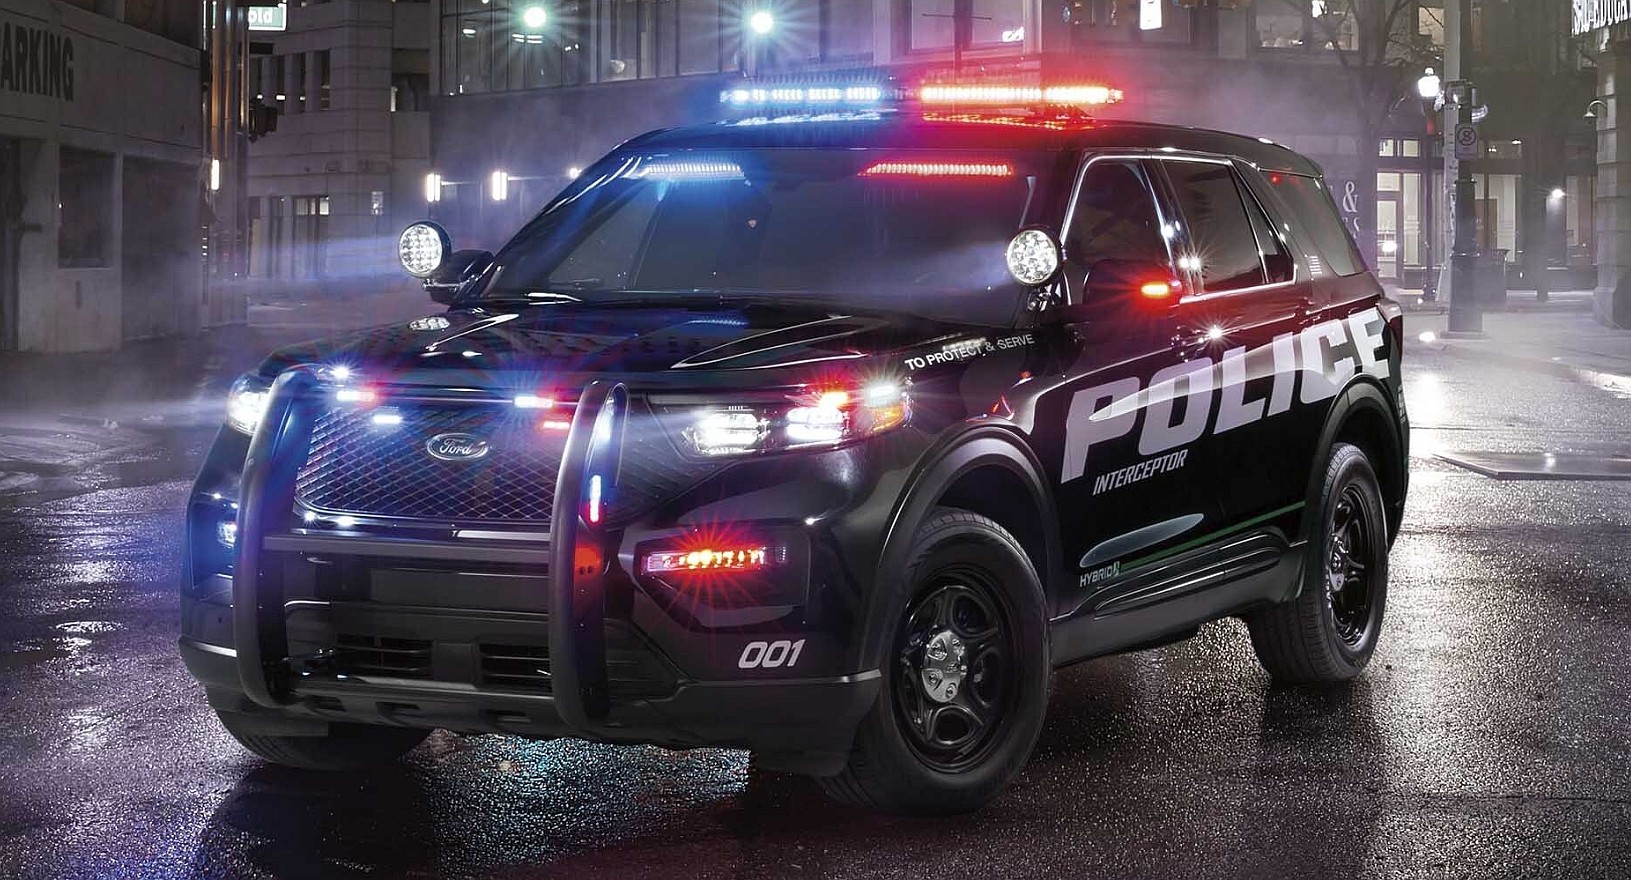 Police Car, Chevy, Ford Pickup, Mustang, Lamborghini, Jeep, NYPD